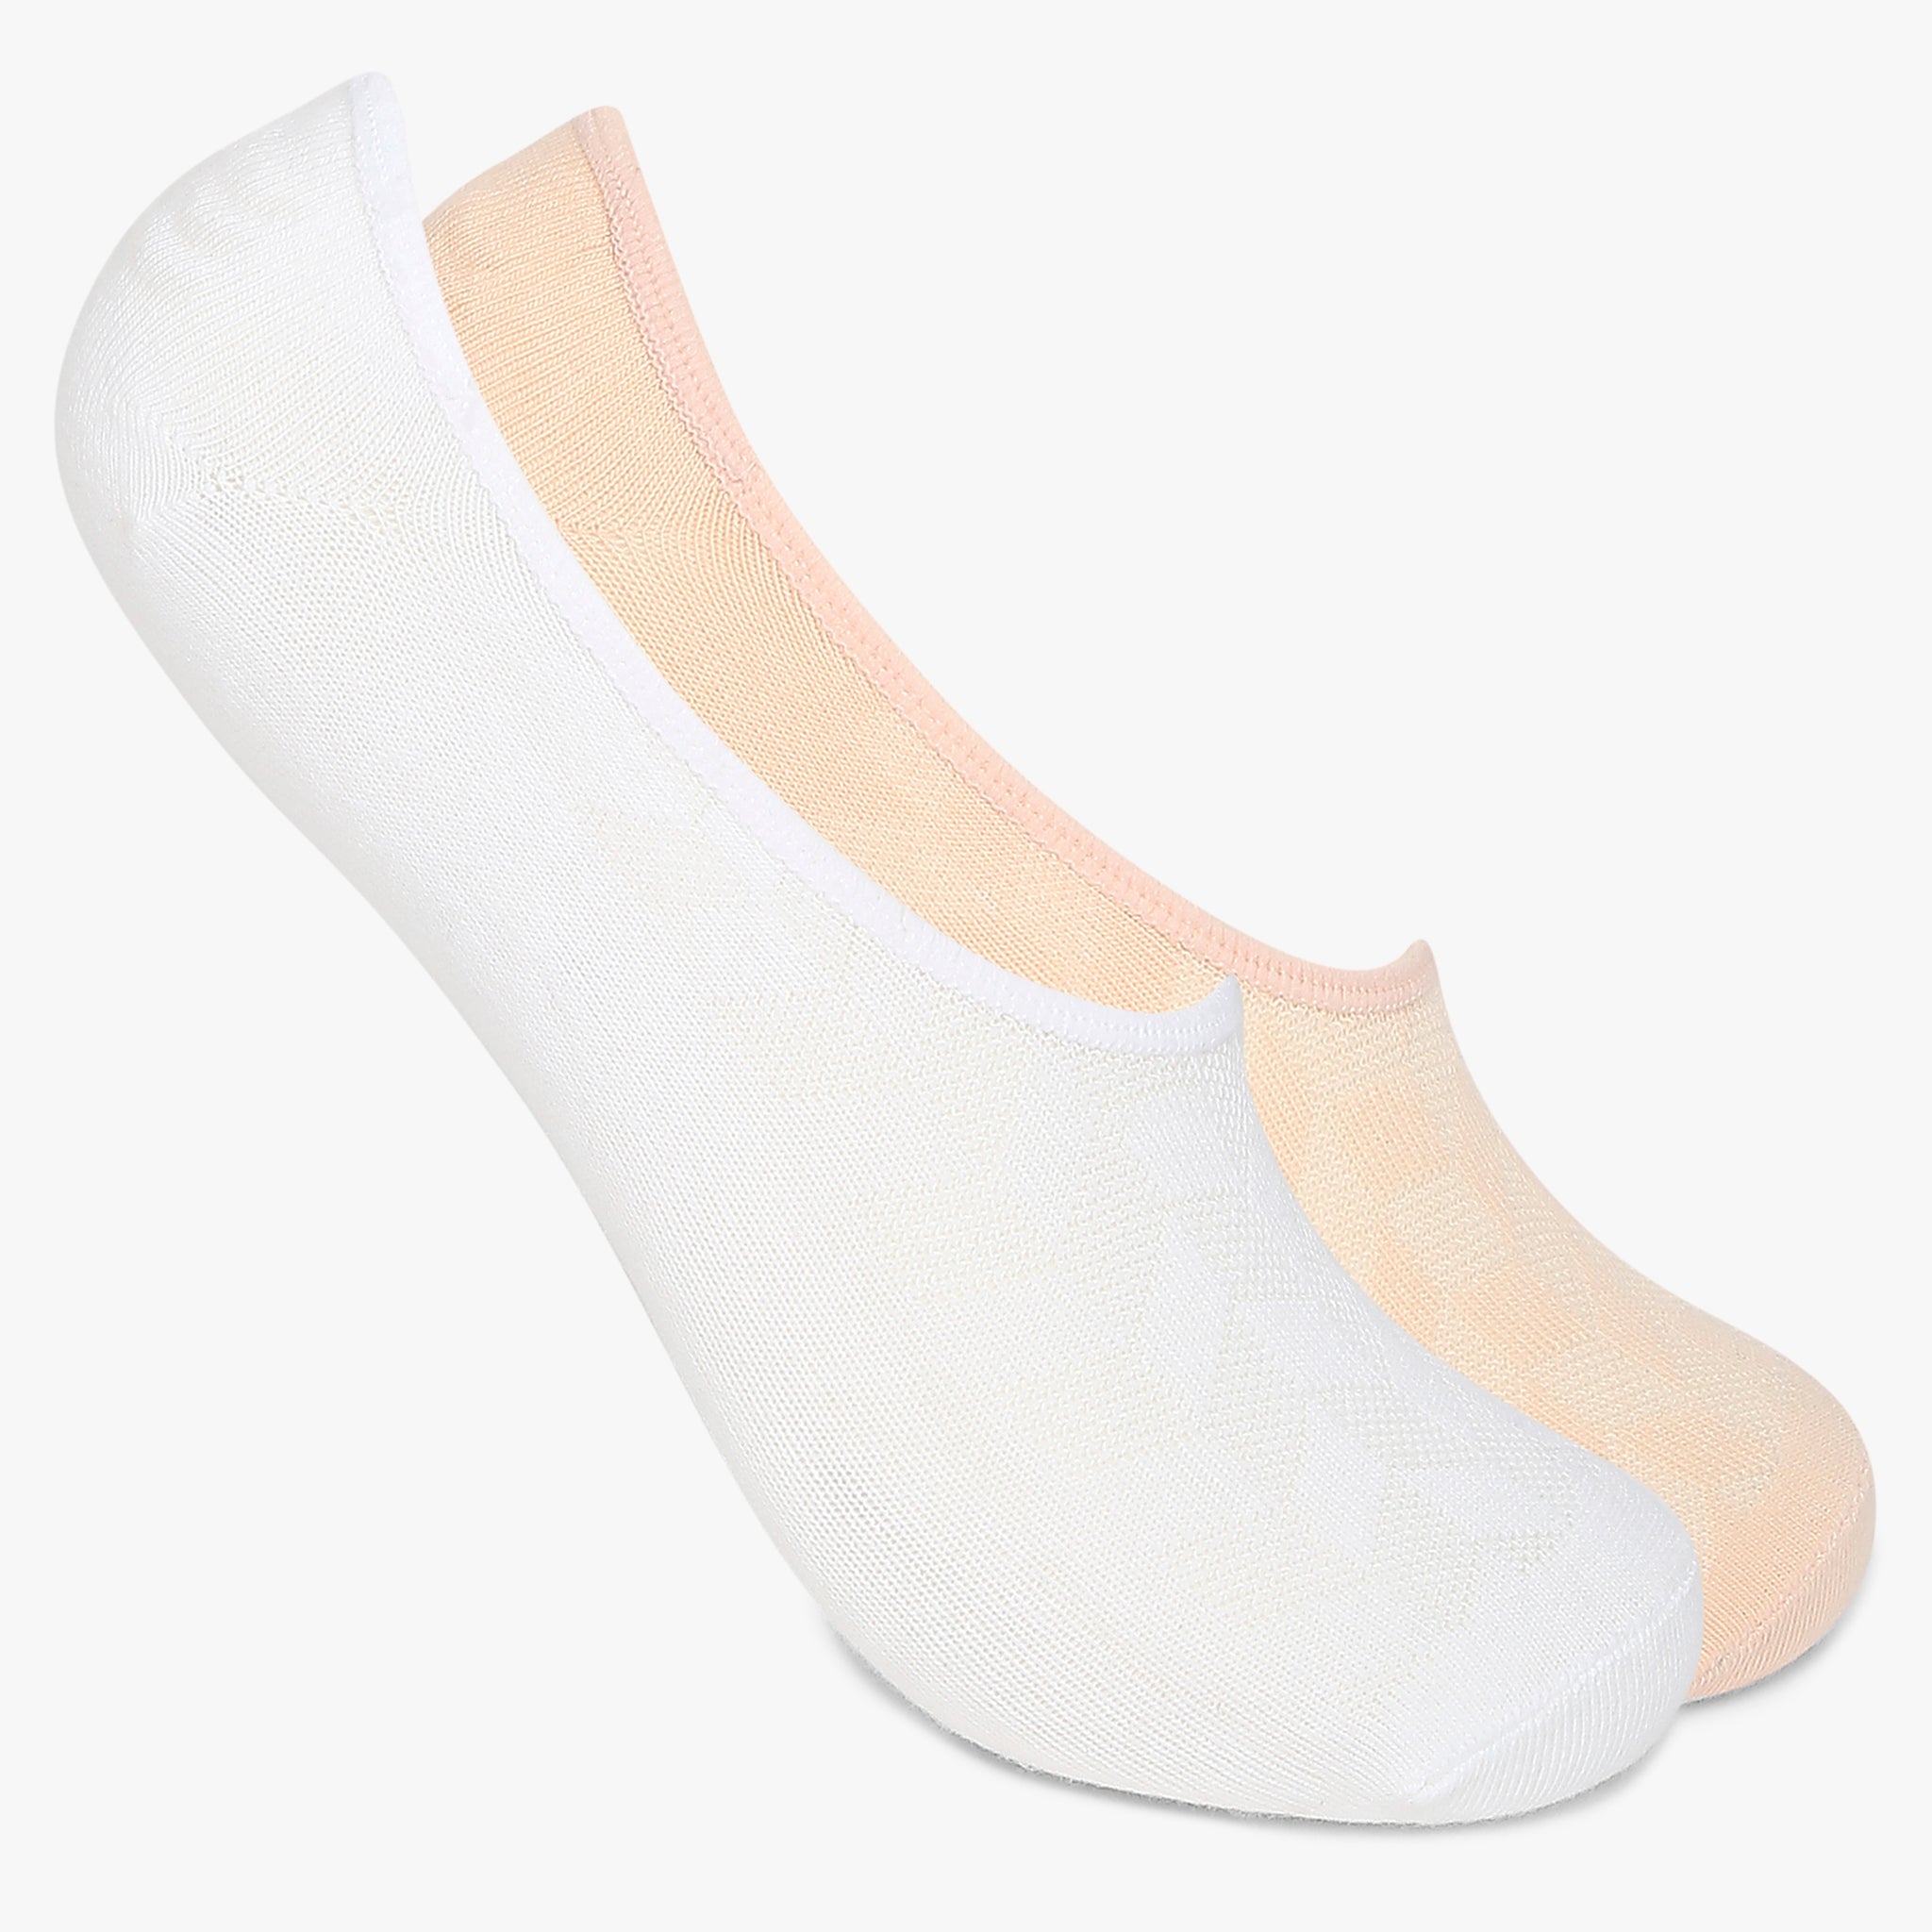 Womens Cotton Solid Socks (Pack of 2)